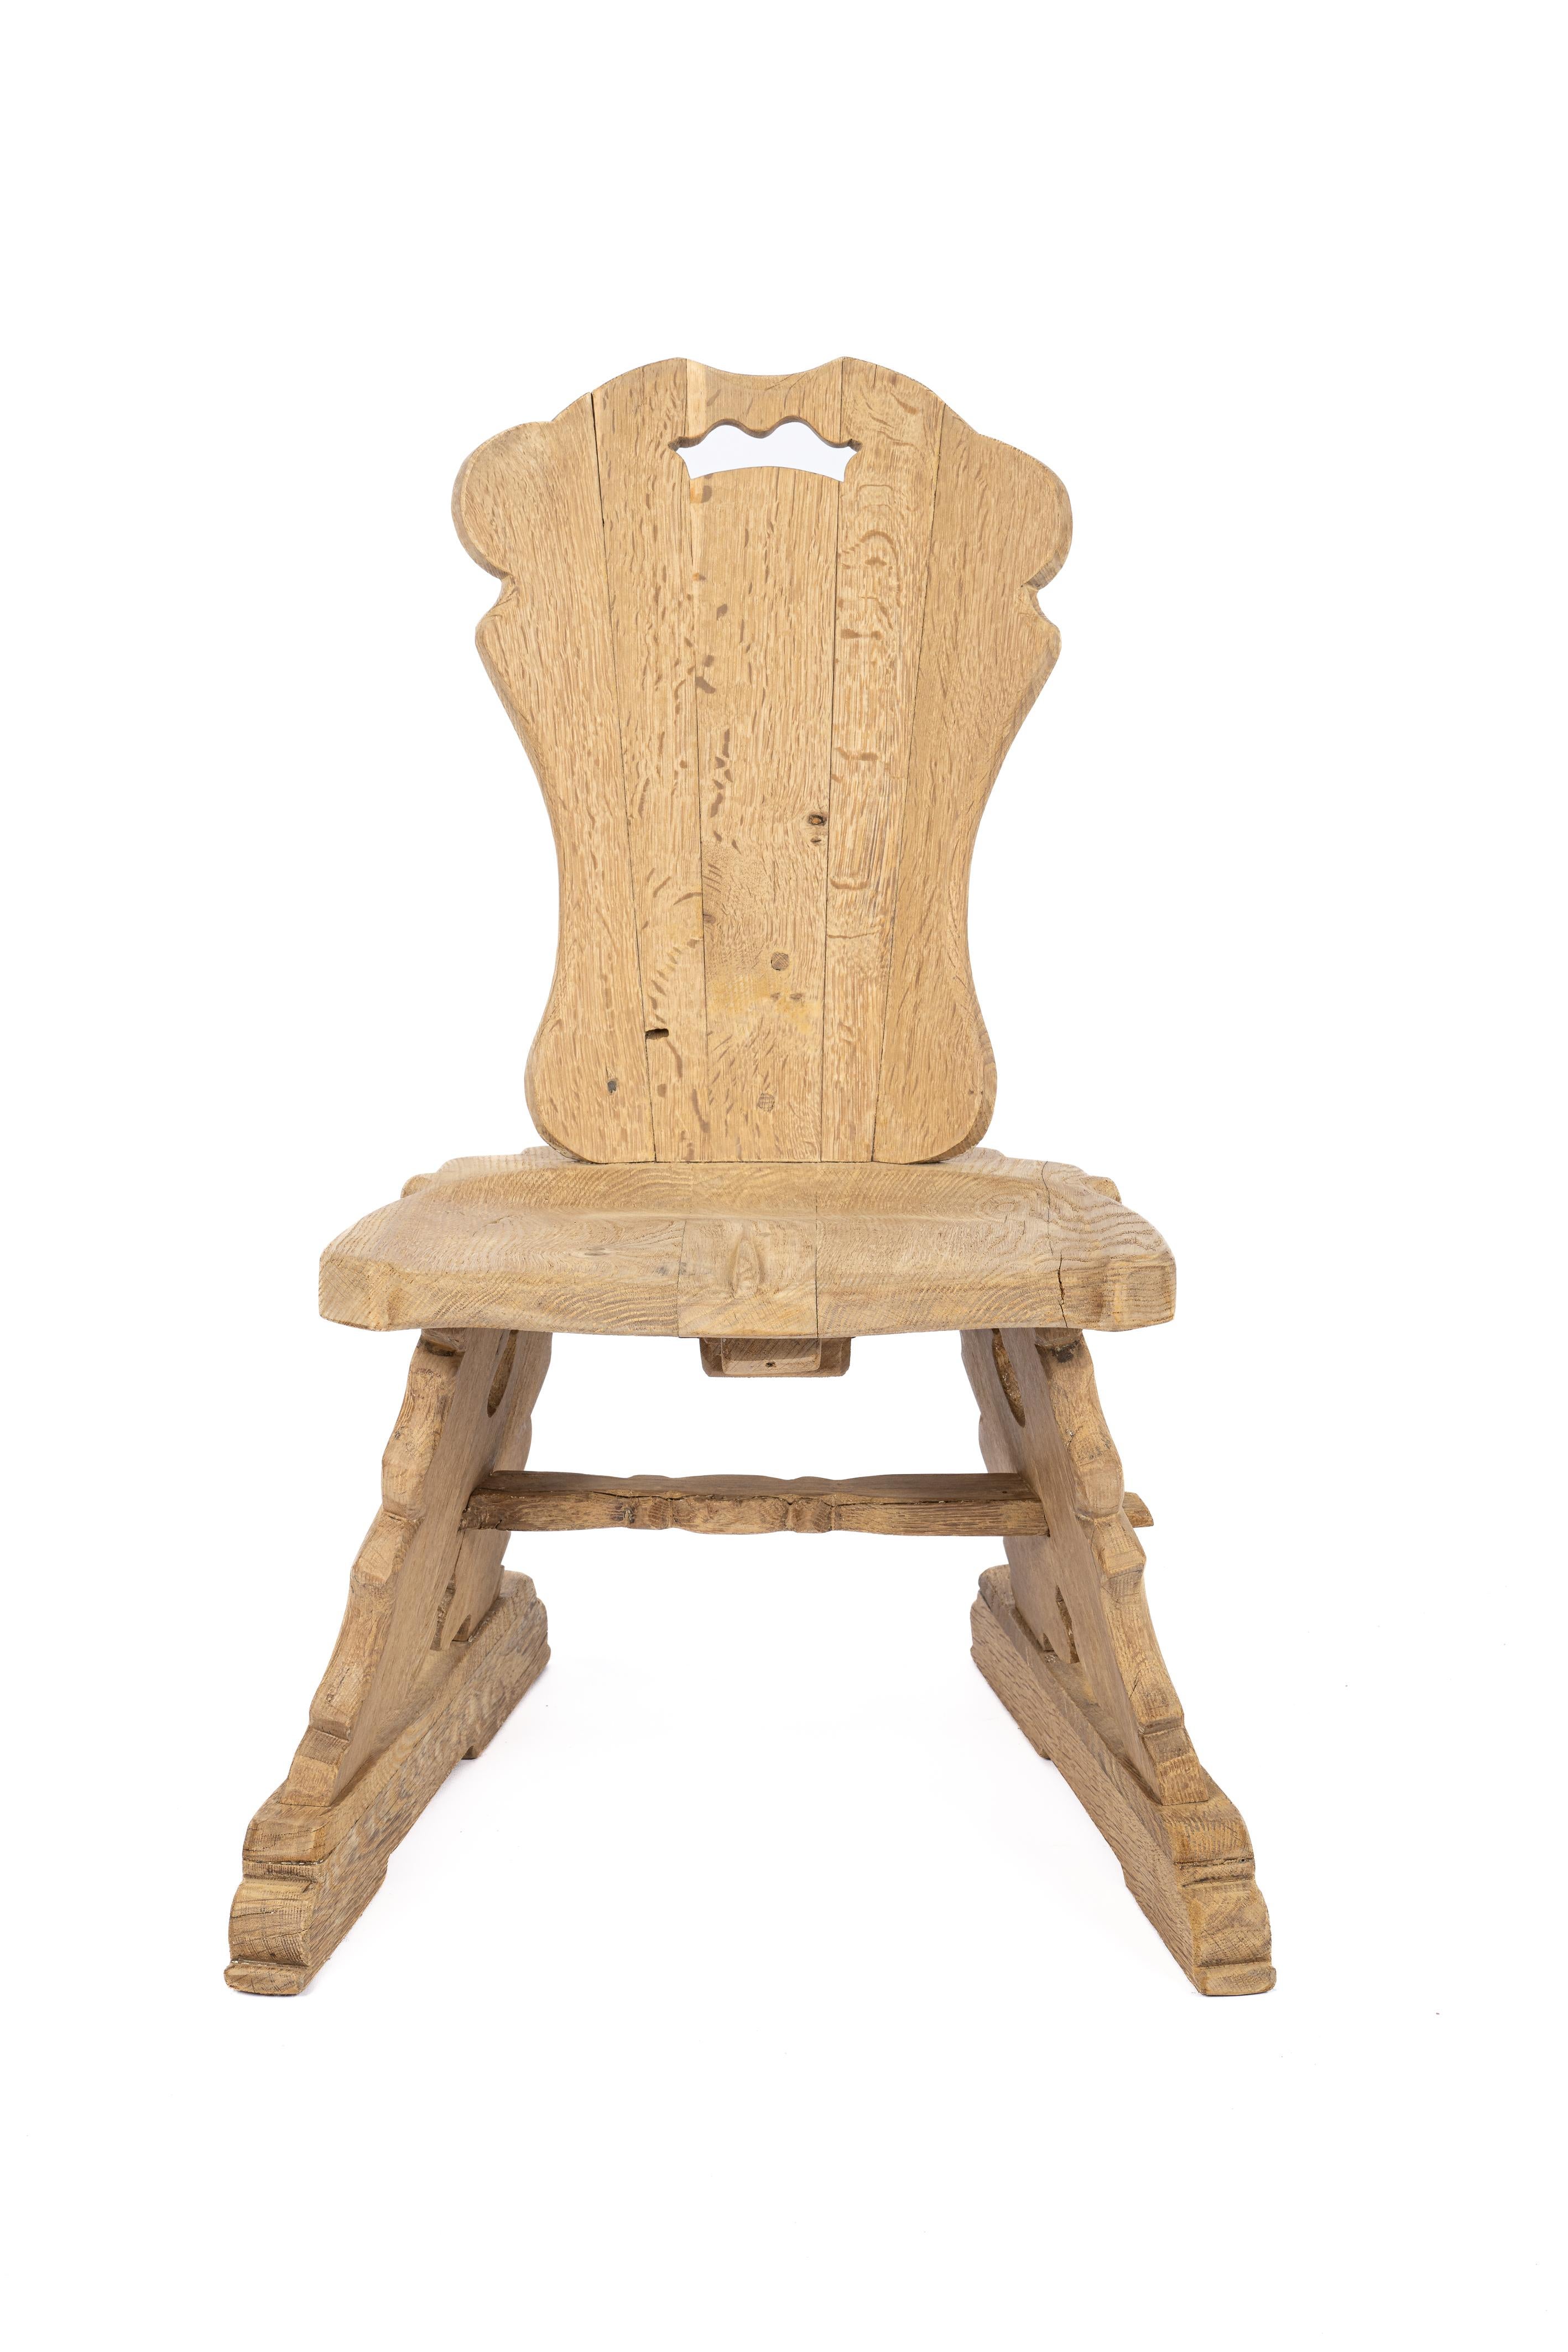 The chair offered here was crafted by master furniture maker Piet Rombouts around 1950. The chair was made from the finest quarter-sawn summer oak available. The wood is very stable and features a beautiful grain pattern with natural appearance. The